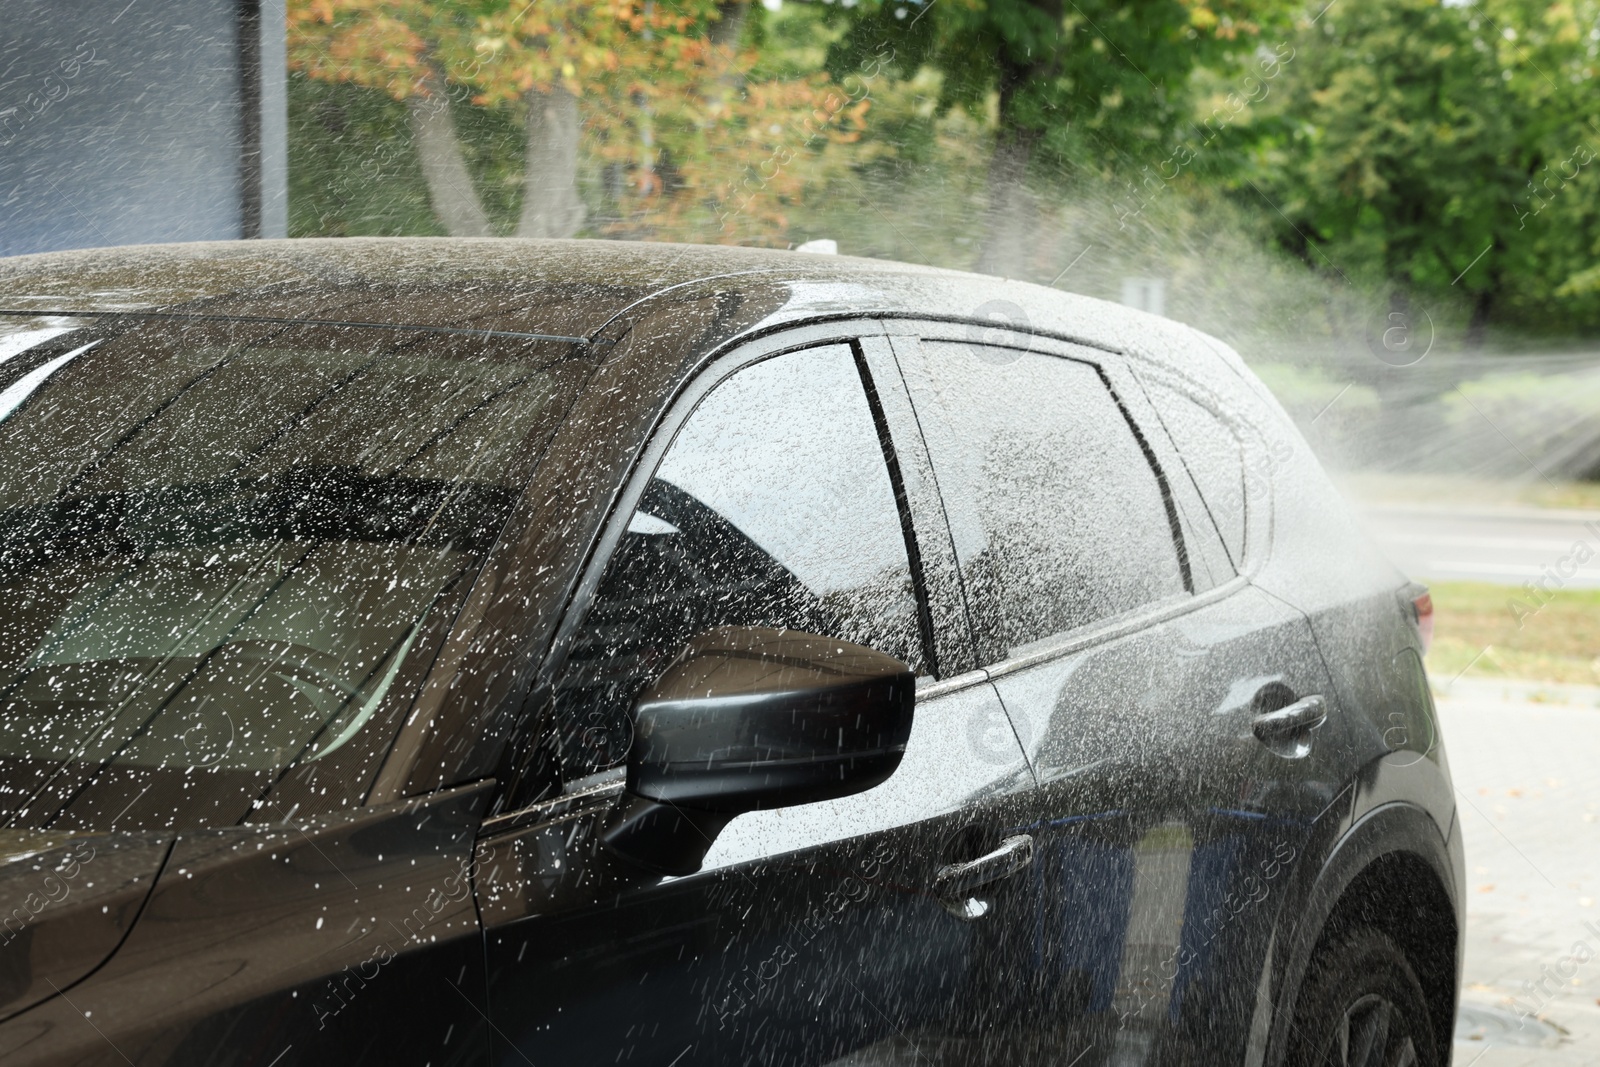 Photo of Washing auto with high pressure water jet at outdoor car wash